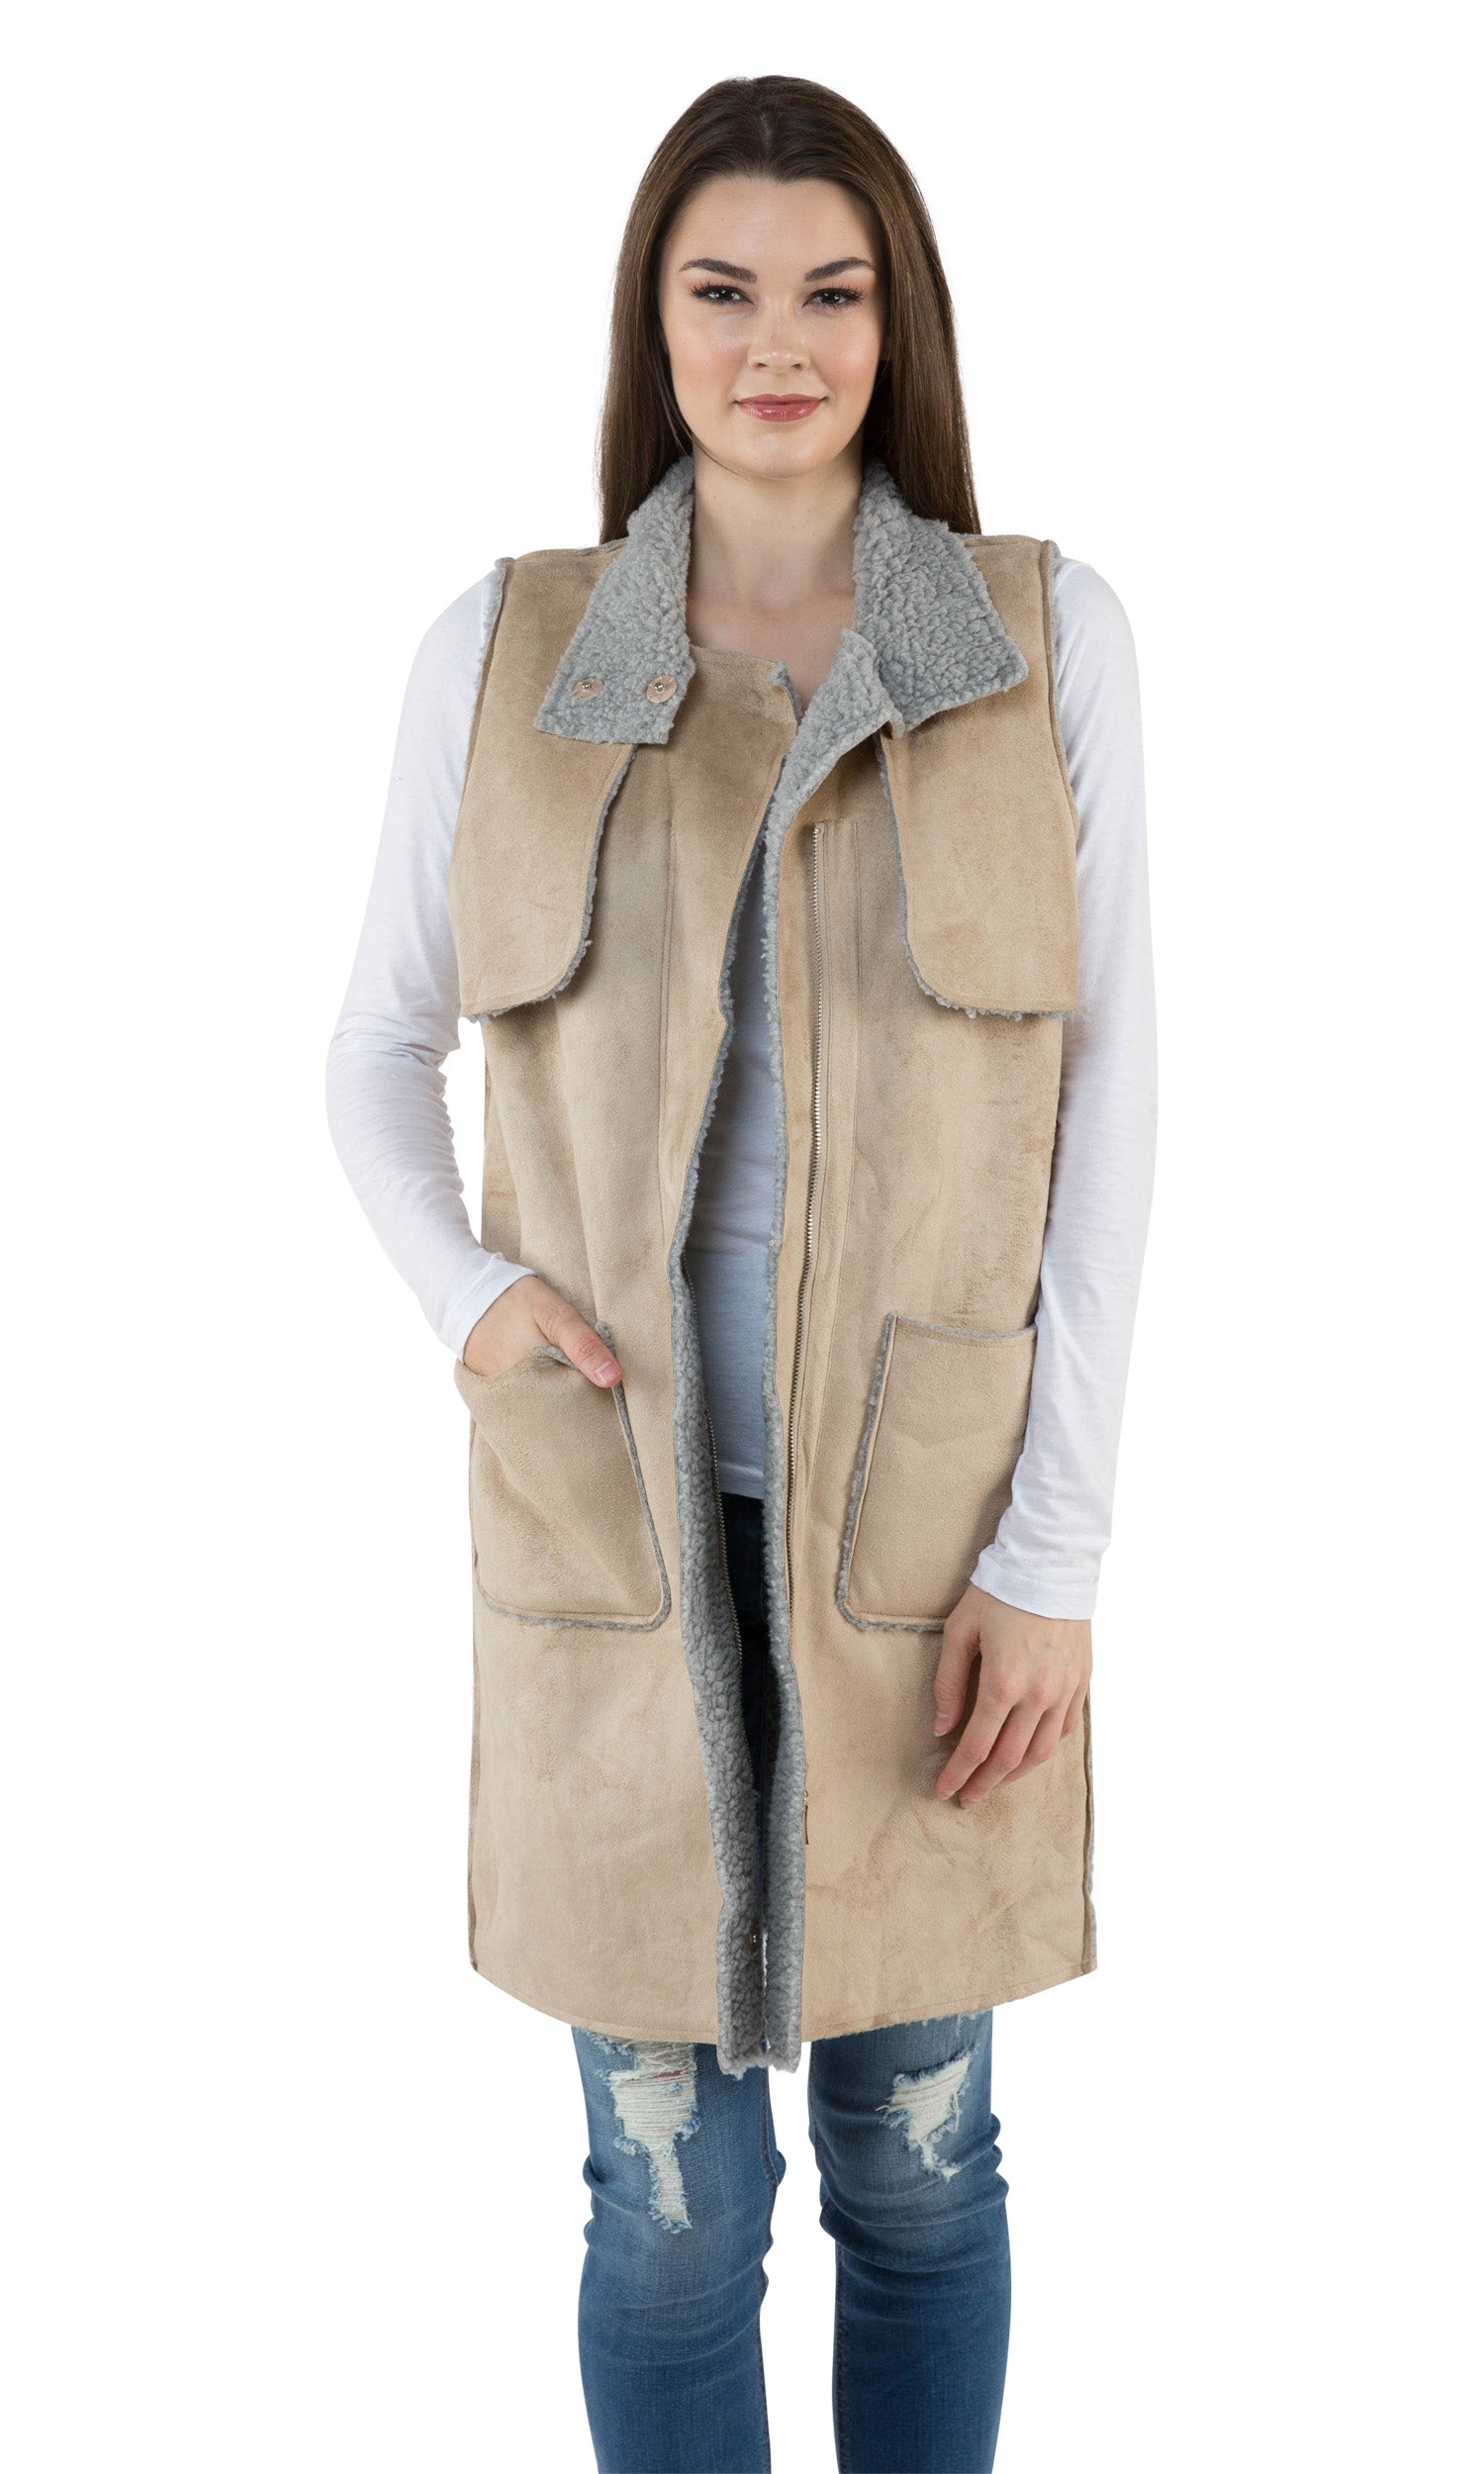 J.O.A. Sleeveless Faux Suede Vest